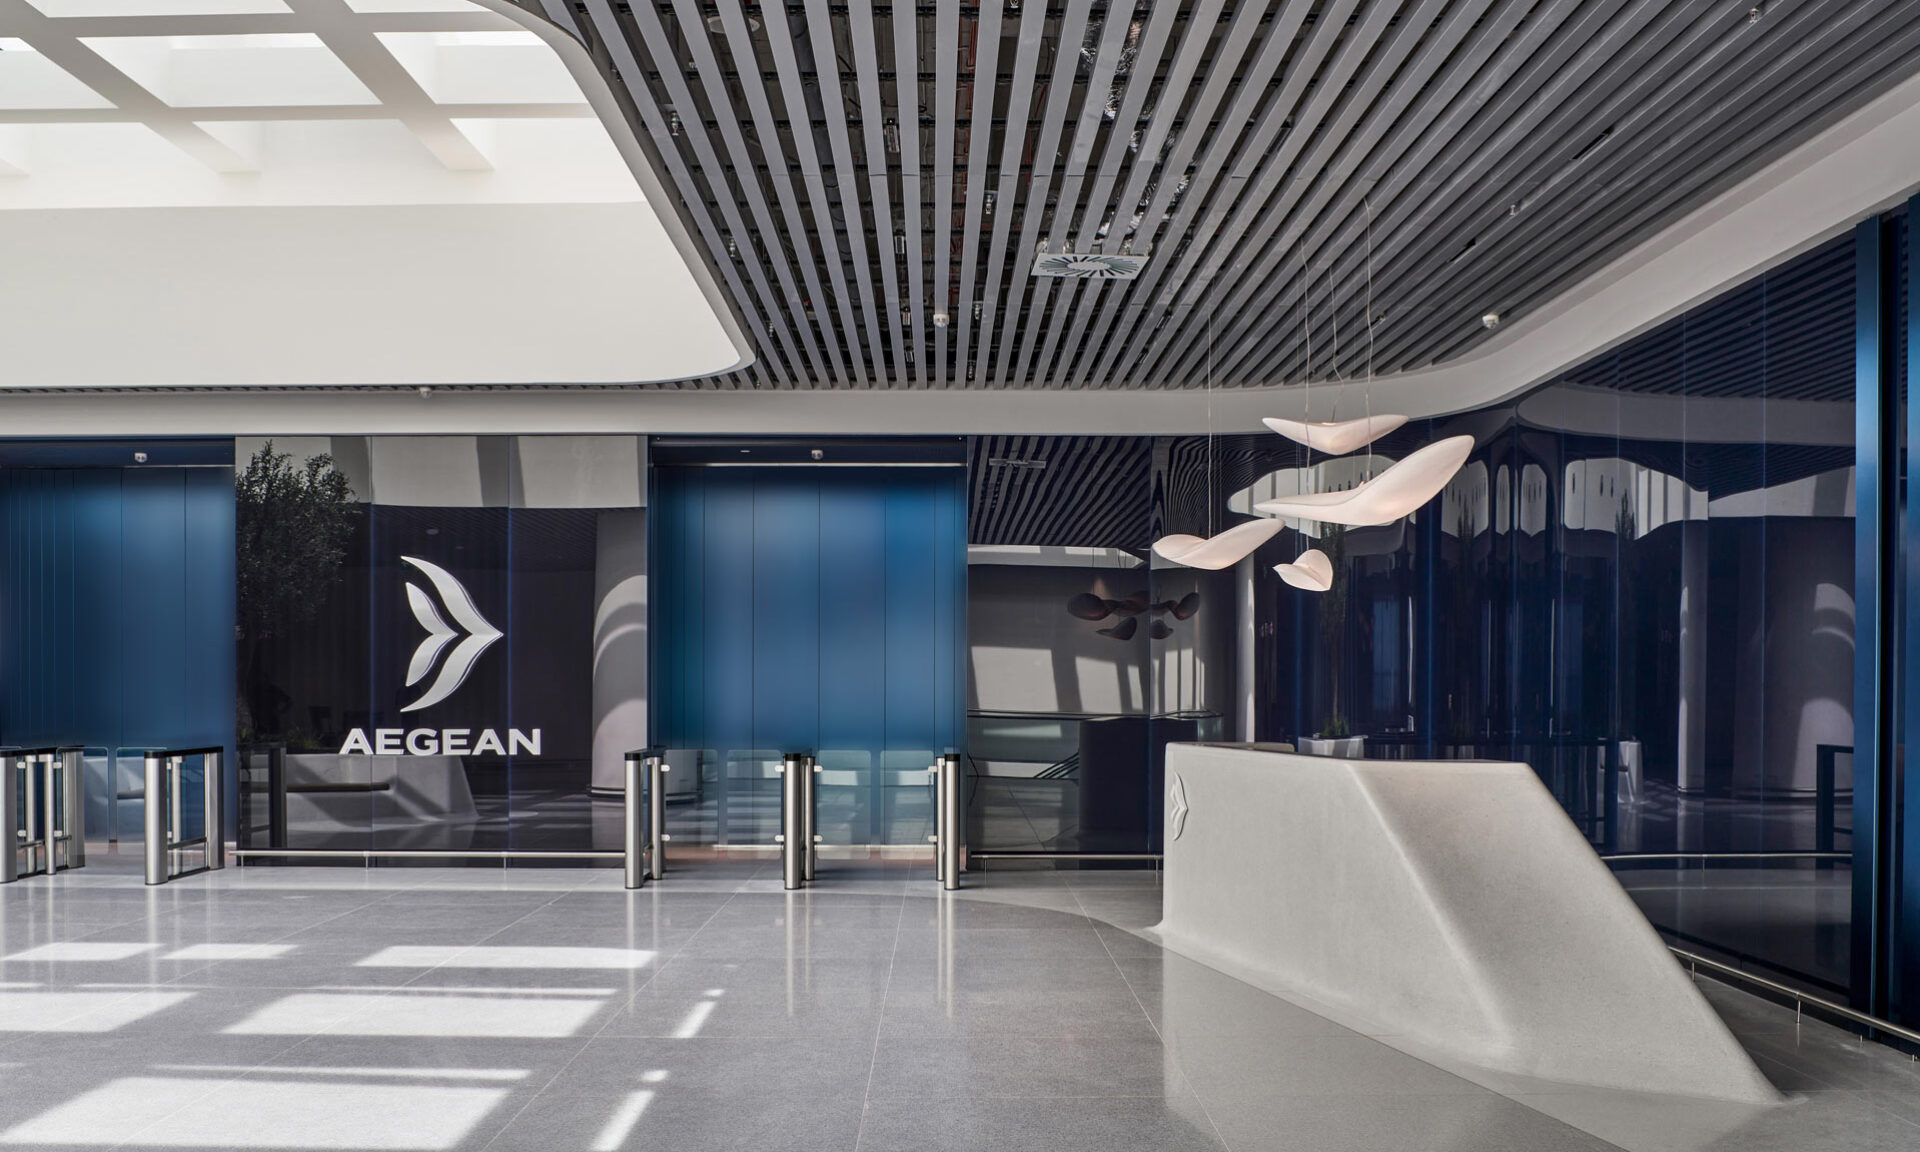 Aegean Airlines welcome you to the new Business Lounge of AIA